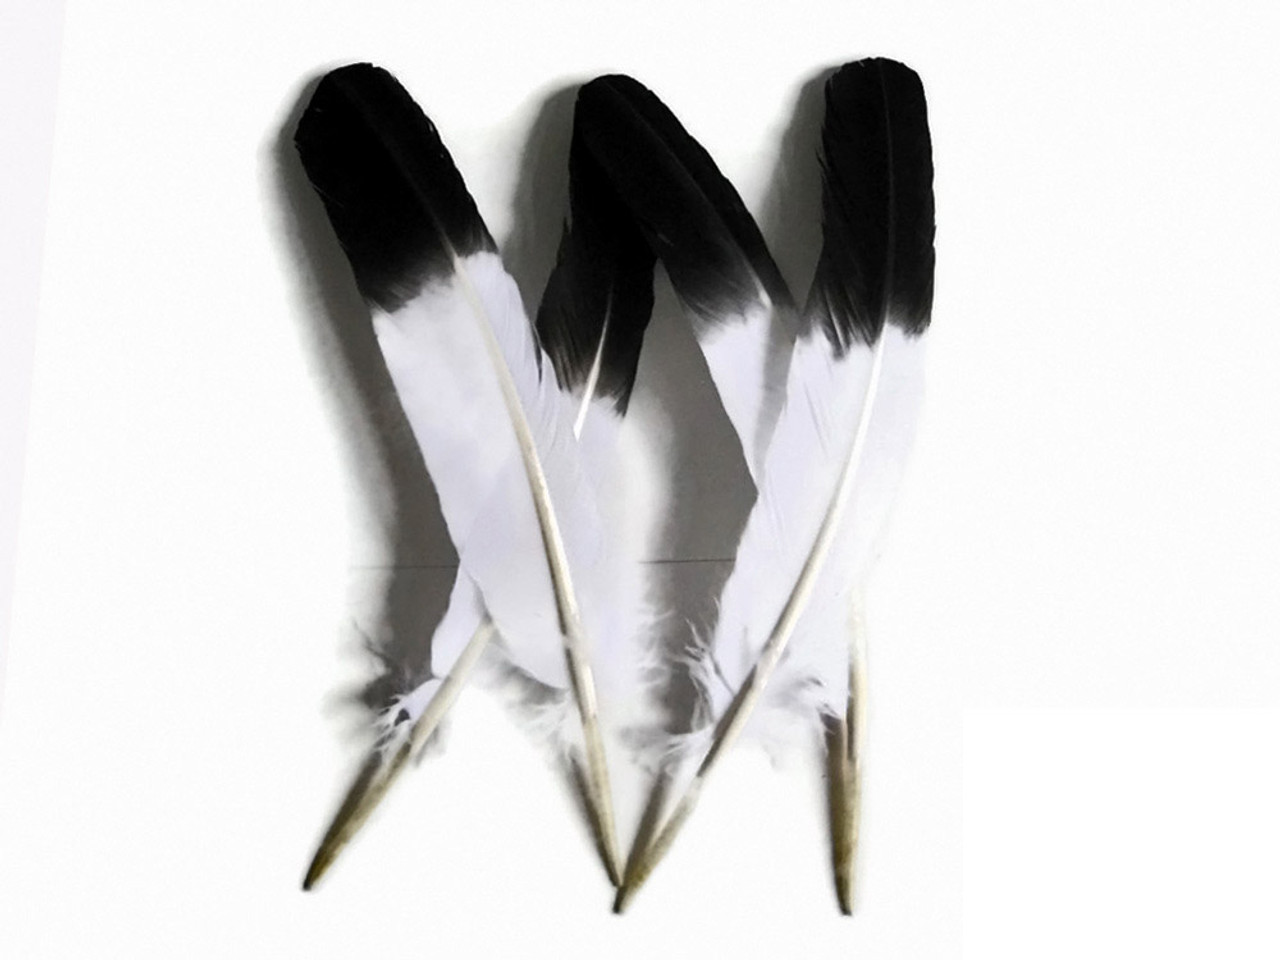 30 Pack, Metallic Gold Dipped Black Real Goose Feathers